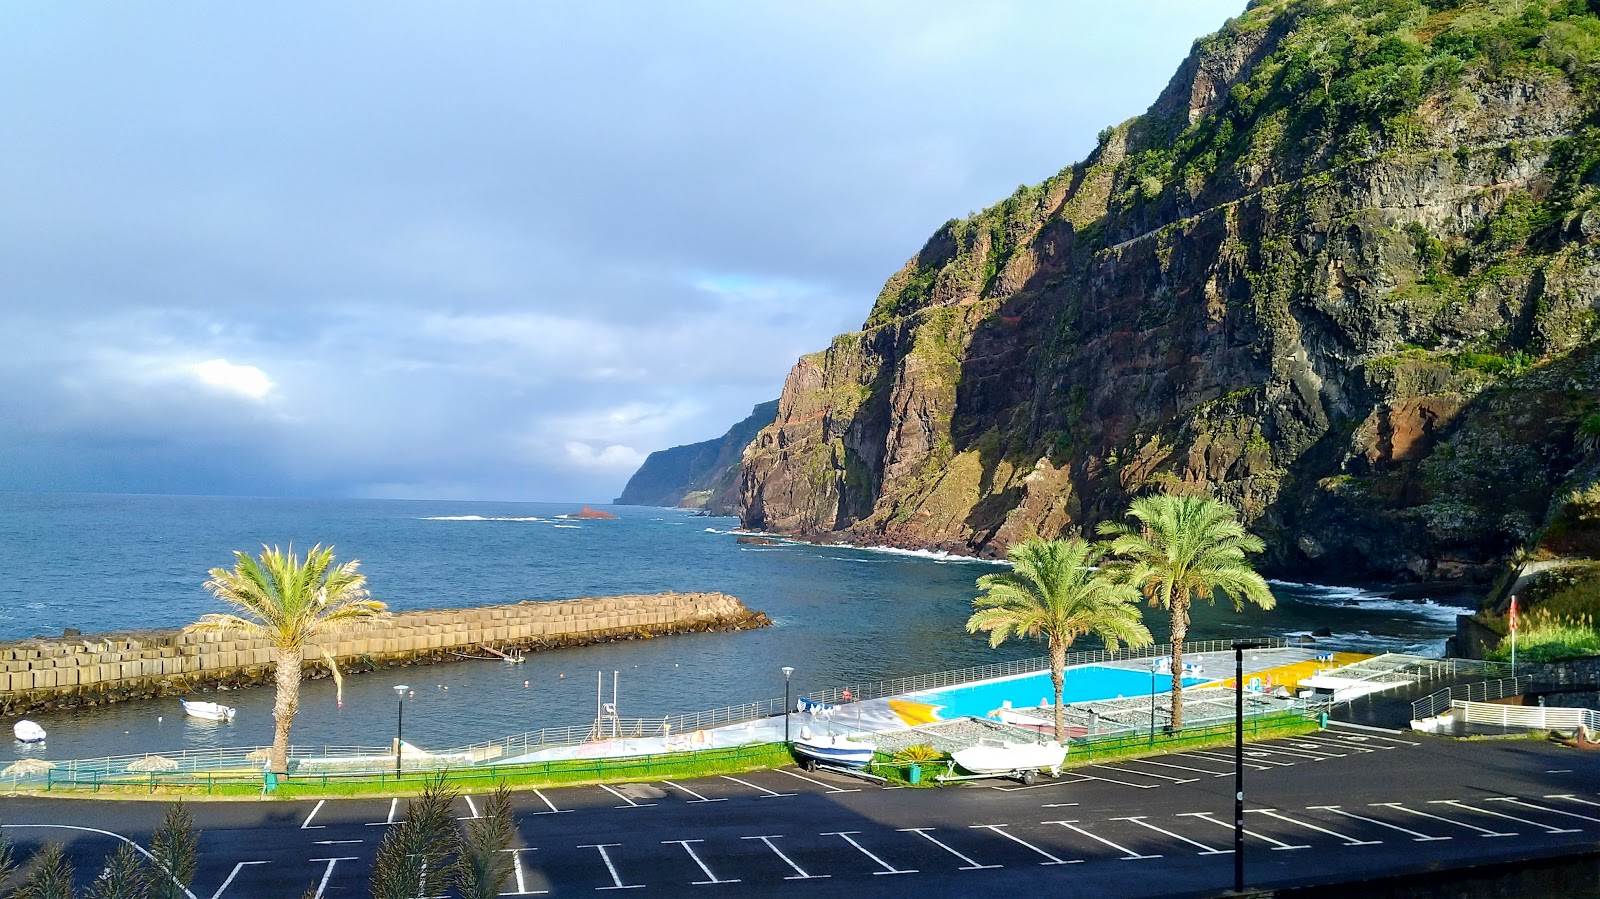 Photo of Piscinas de Ponta Delgada with turquoise pure water surface